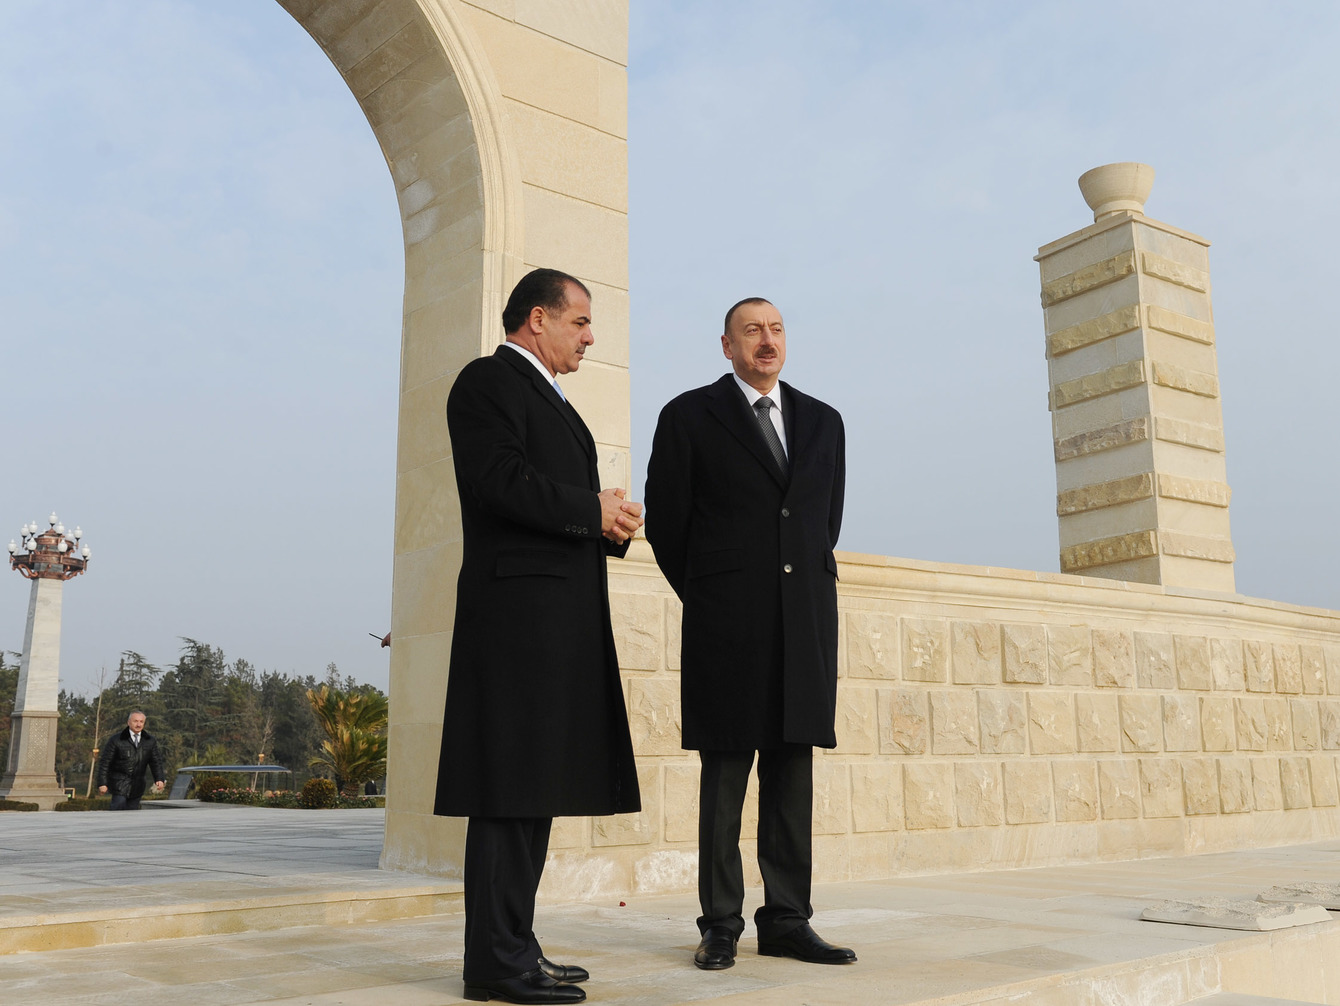 Ilham_Aliyev_attended_the_opening_of_the_Heydar_Aliyev_Park_Complex_and_the_Heydar_Aliyev_Center_in_Ganja_14.jpg